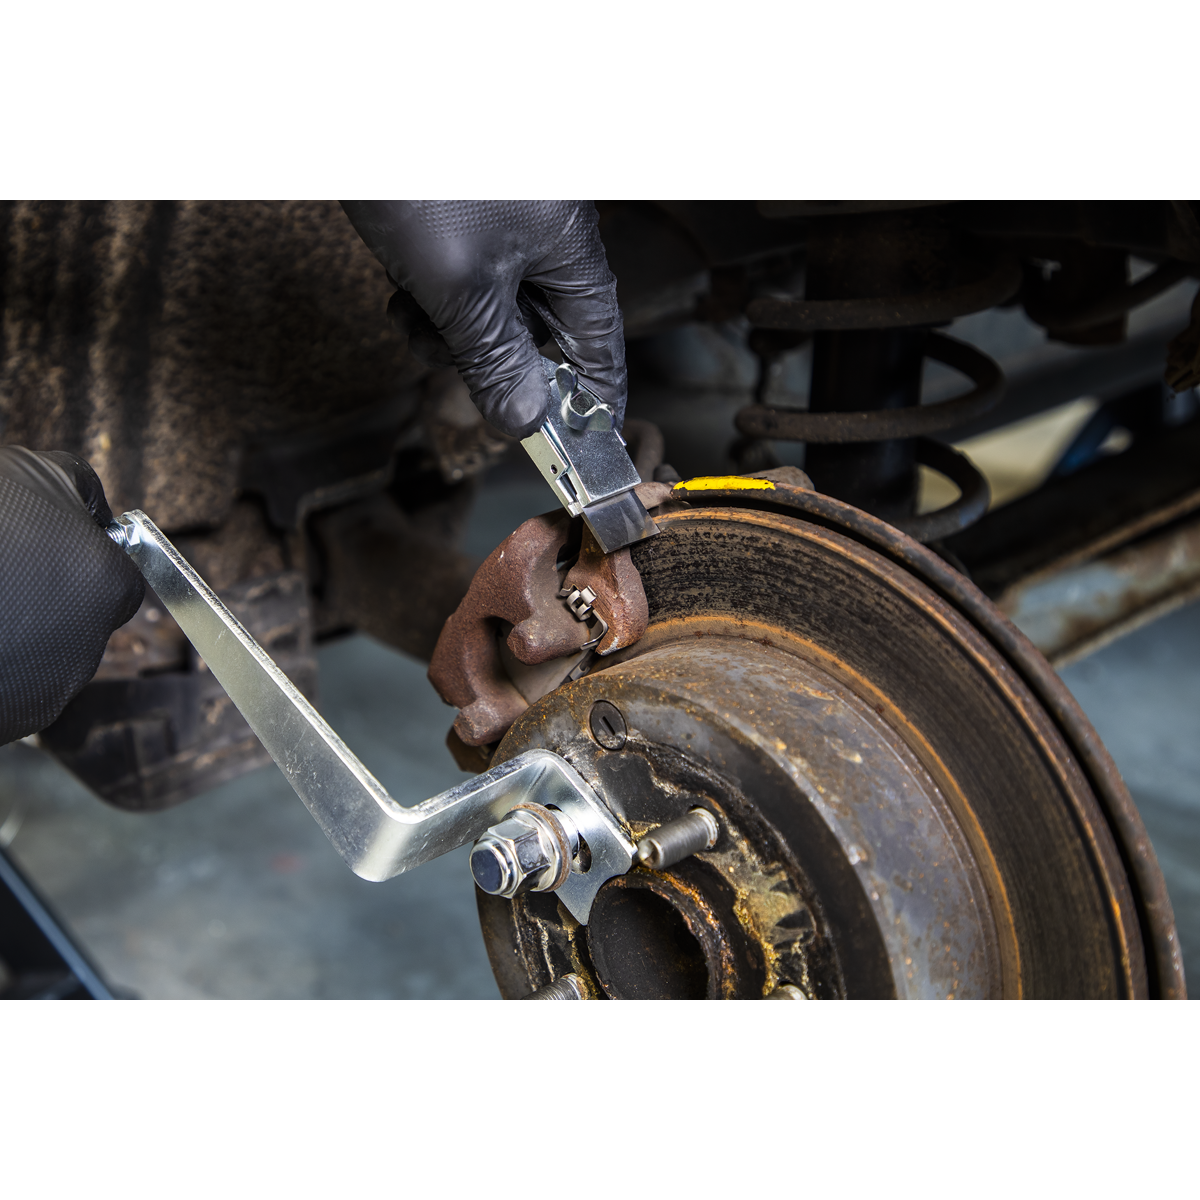 remove the lip and corrosion that can form on the brake disc